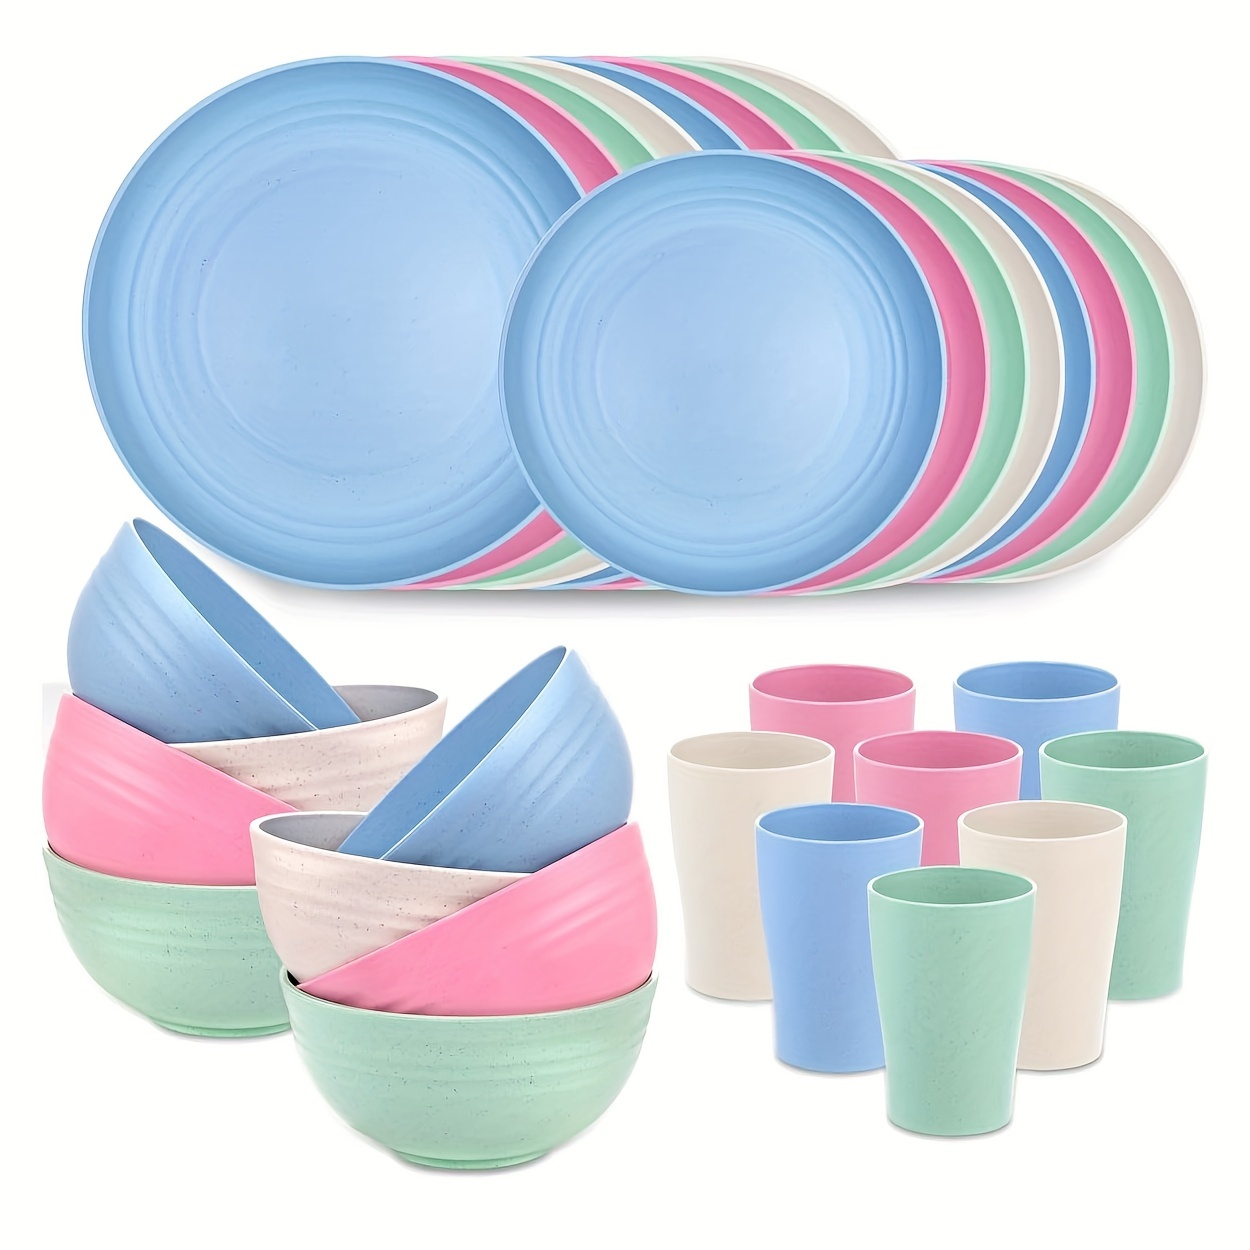 

Wheat Straw Dinnerware, Microwave Dishwasher Safe, Unbreakable Light Weight Plates Service For 8, Reusable Tableware Set, Multicolor Set 16pcs Plates, 8pcs Bowls, 8pcs Cups